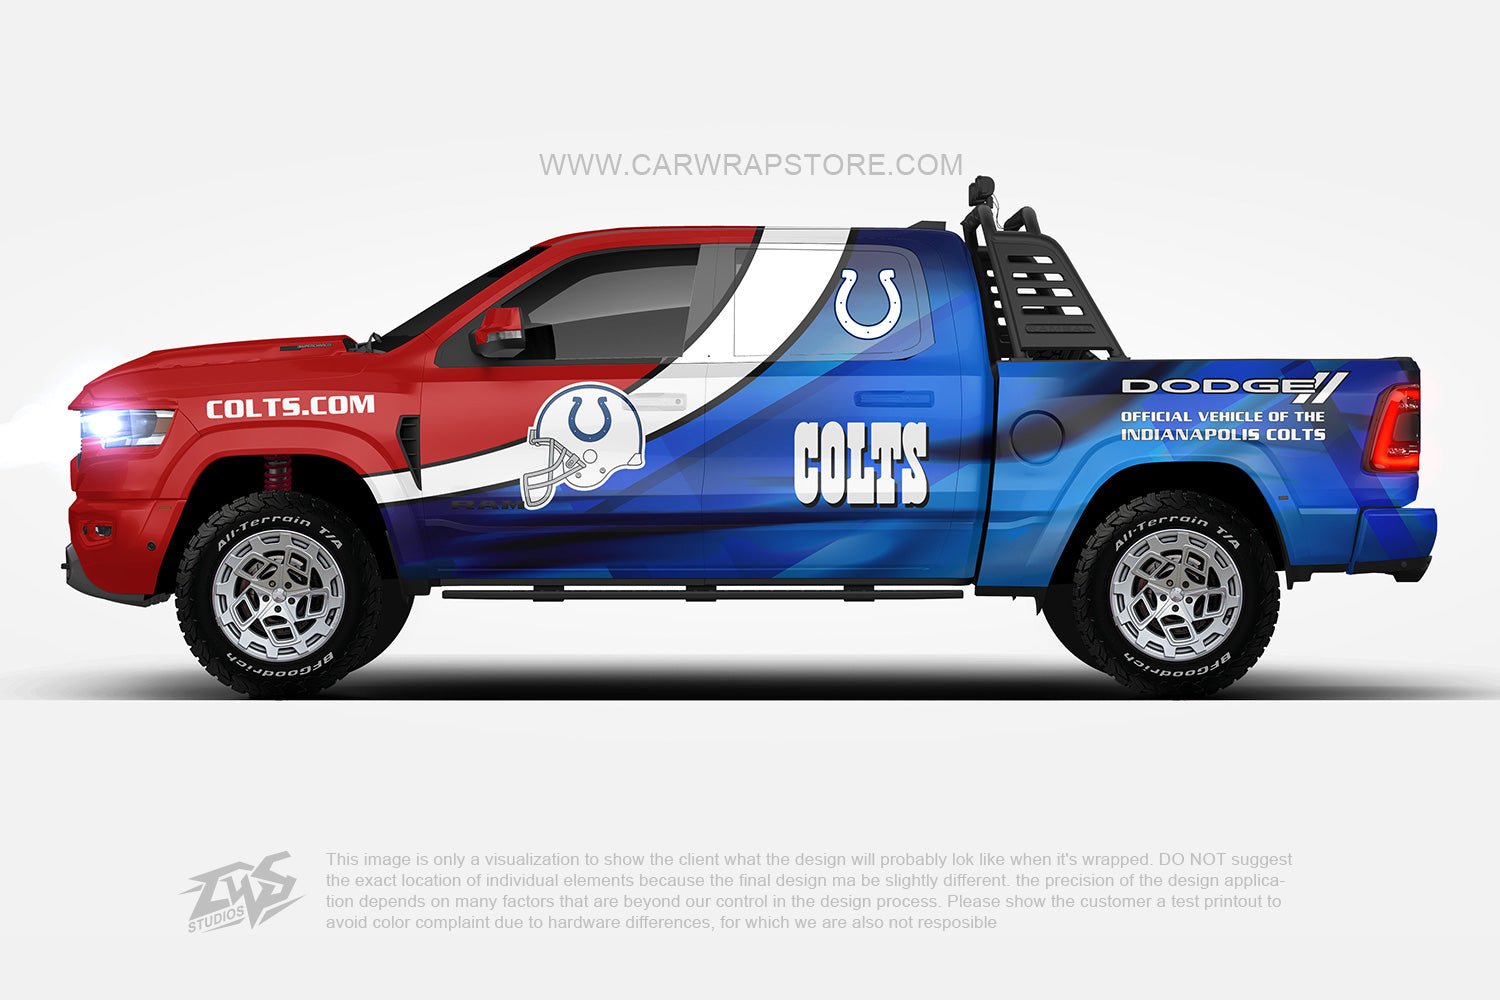 Indianapolis Colts【NFL-01】 - Car Wrap Store